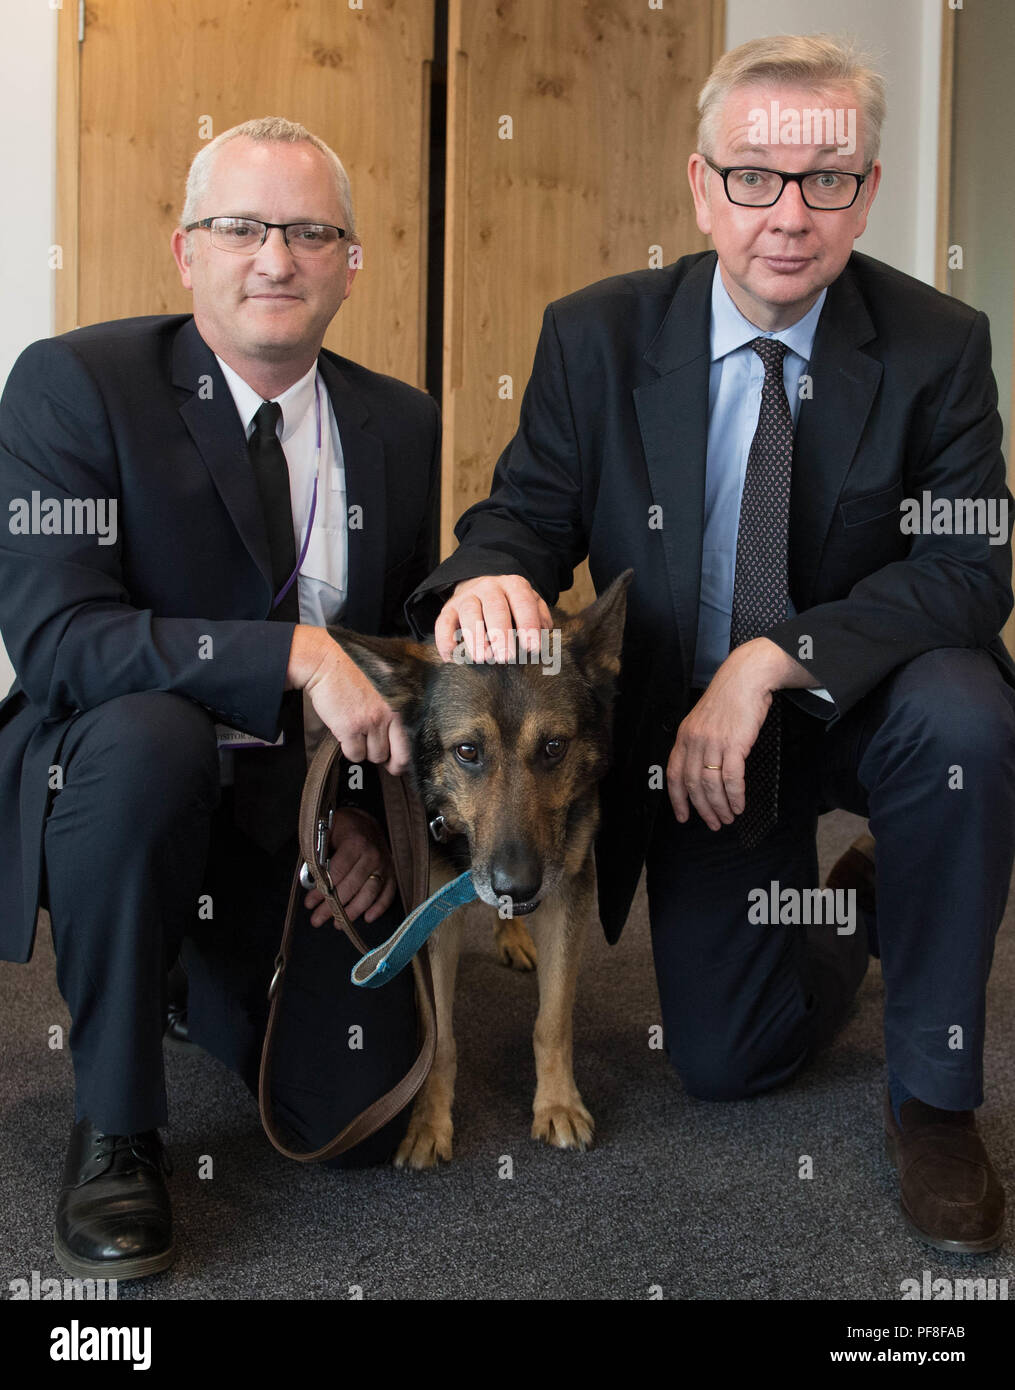 Environment Secretary Michael Gove (right) meets hero police dog Finn, who suffered severe injuries whilst on duty, and his handler PC Dave Wardell at his office in London after giving the Government's backing to a bill implementing a so-called 'Finn's Law' protecting police dogs and horses. Stock Photo